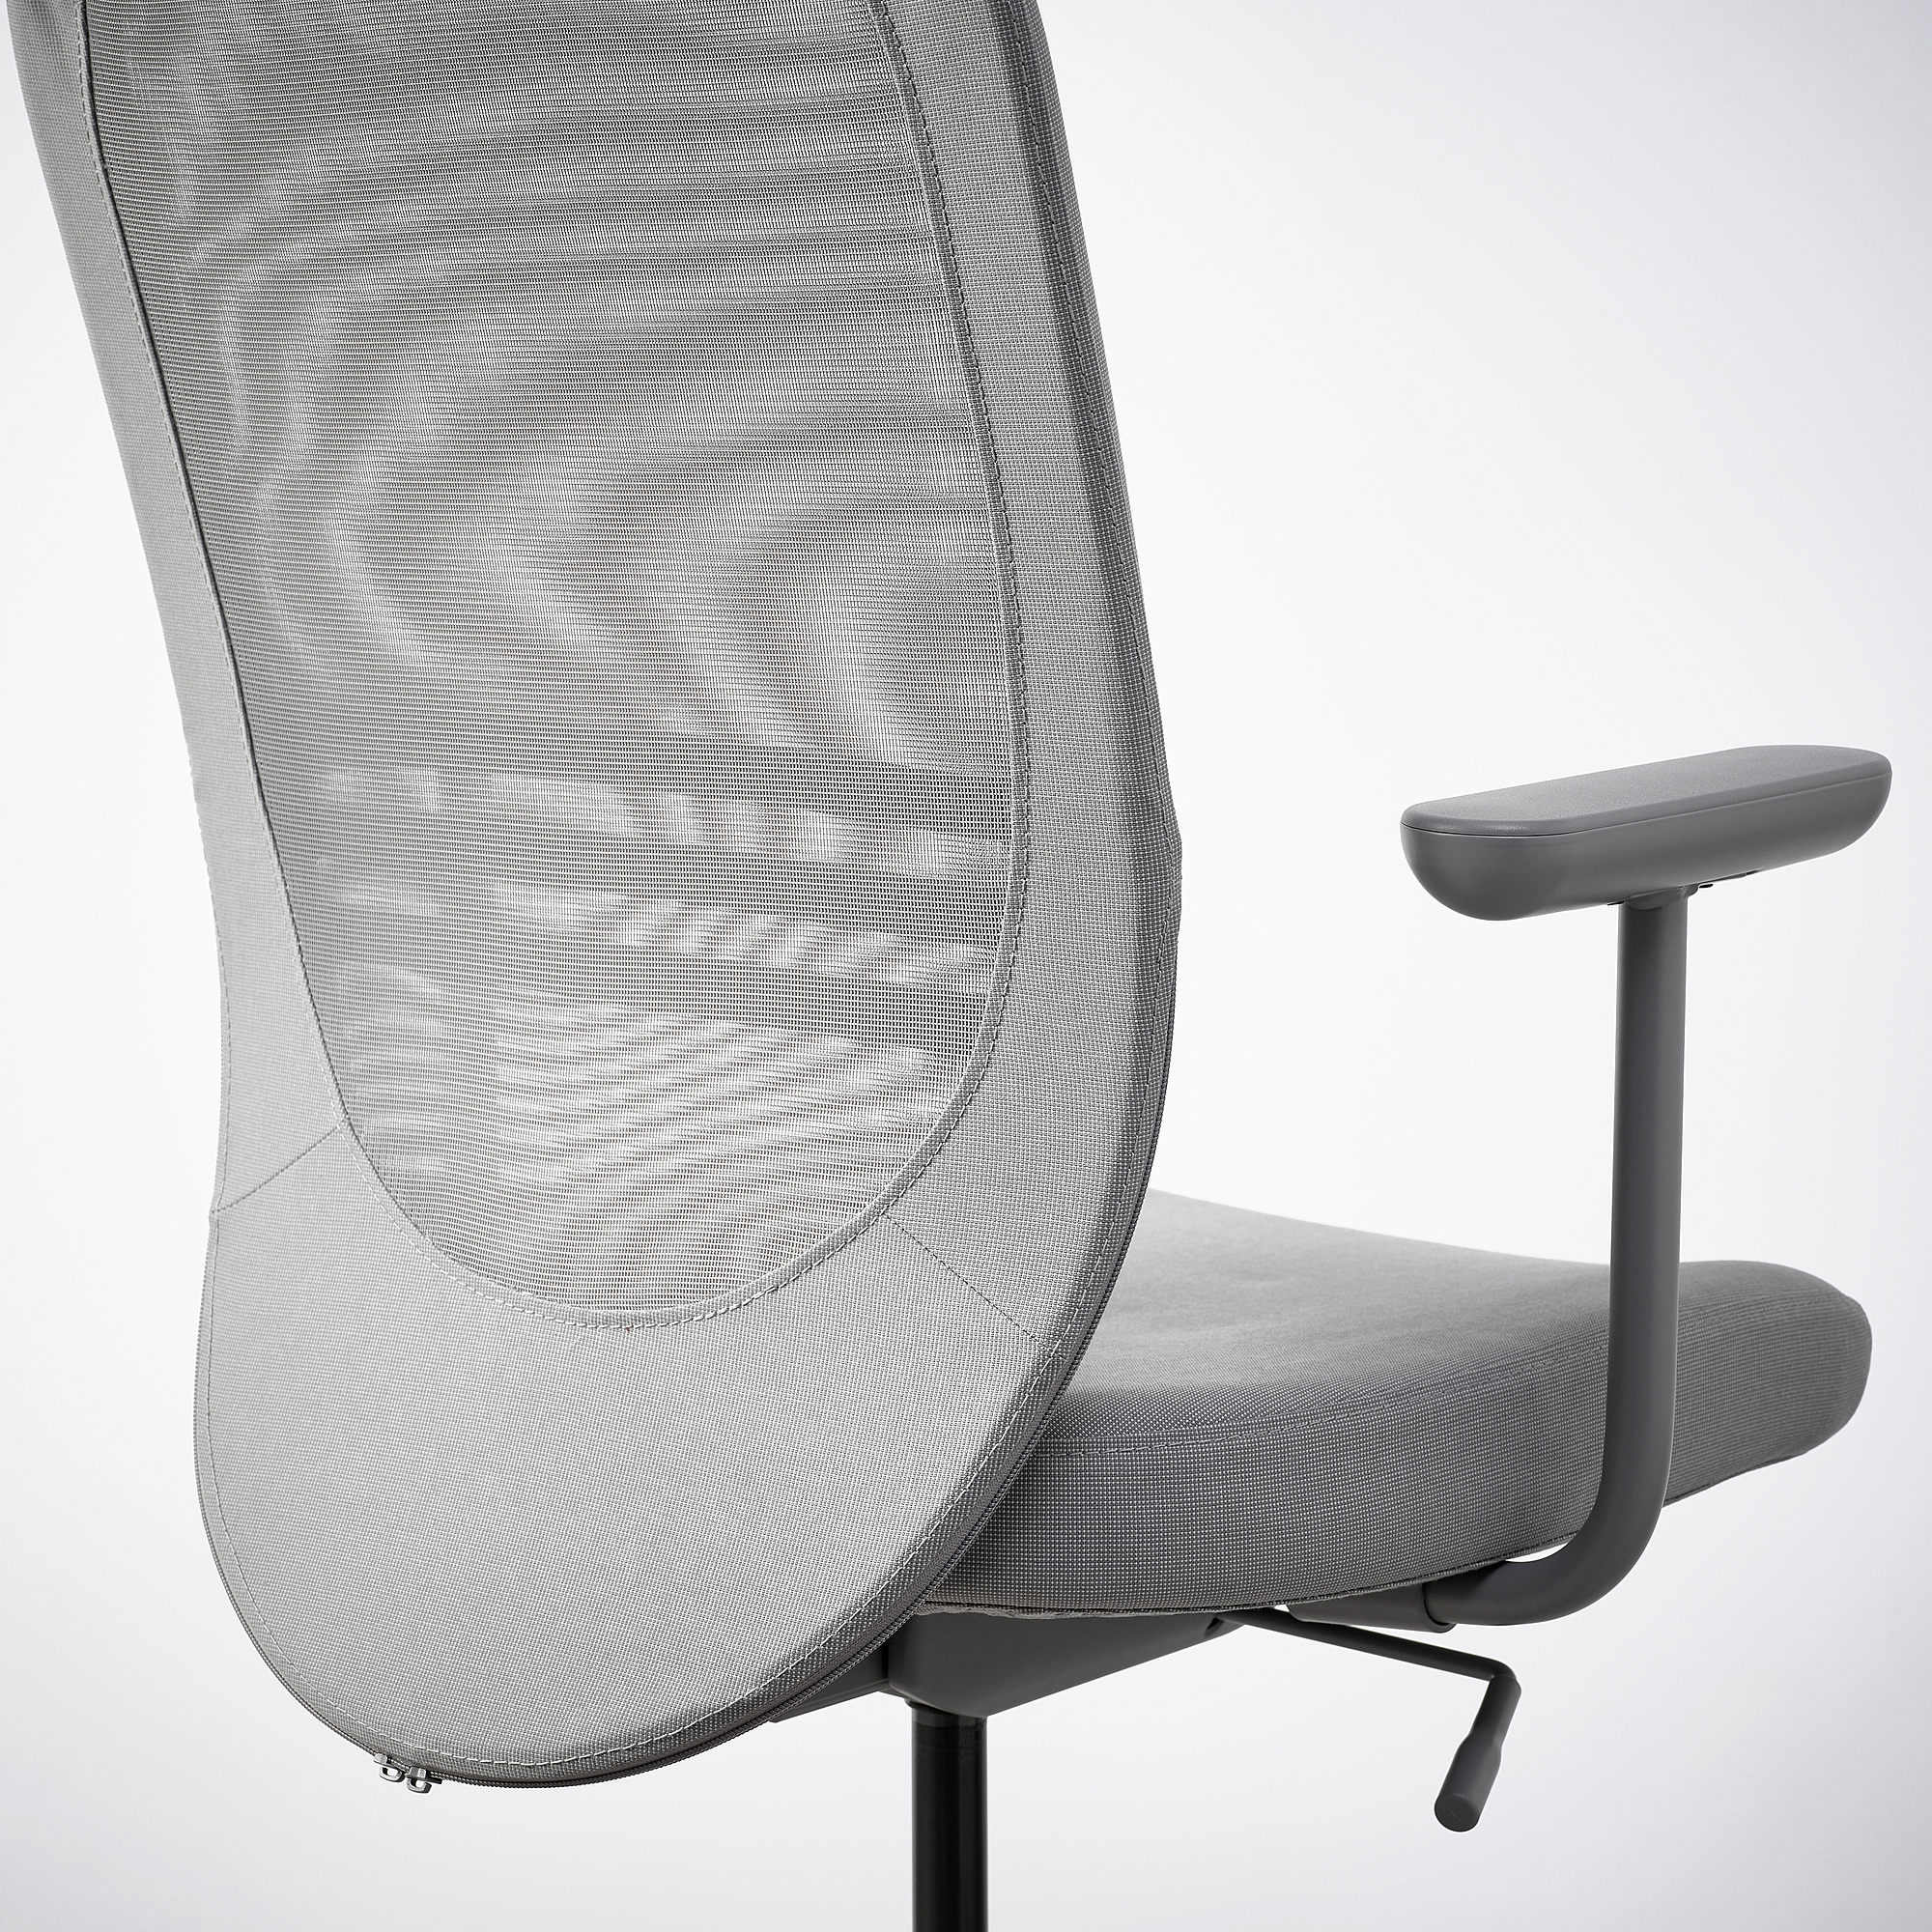 FLINTAN office chair with armrests